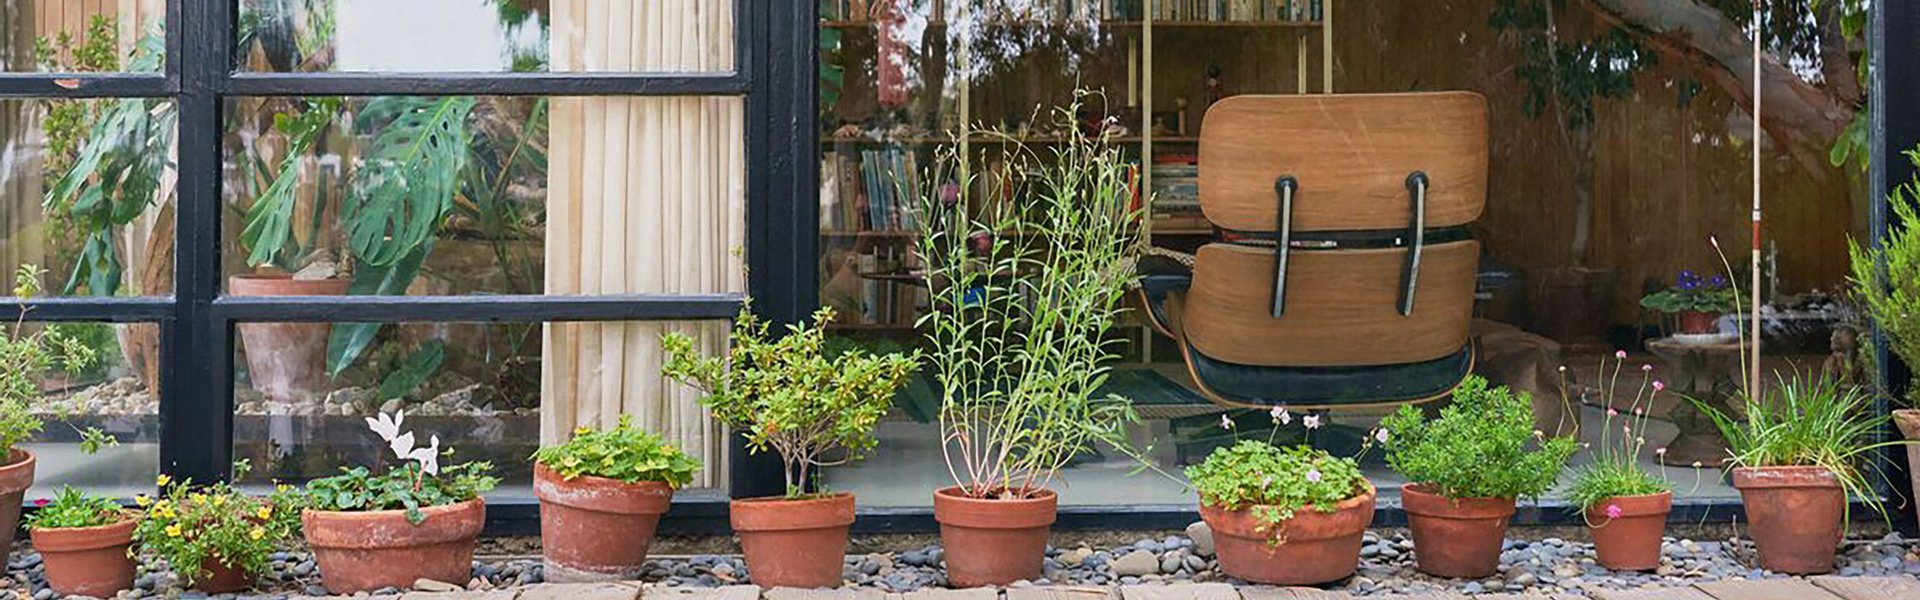 Flower pots along a sidewalk of windows to a house with an Eames chair inside